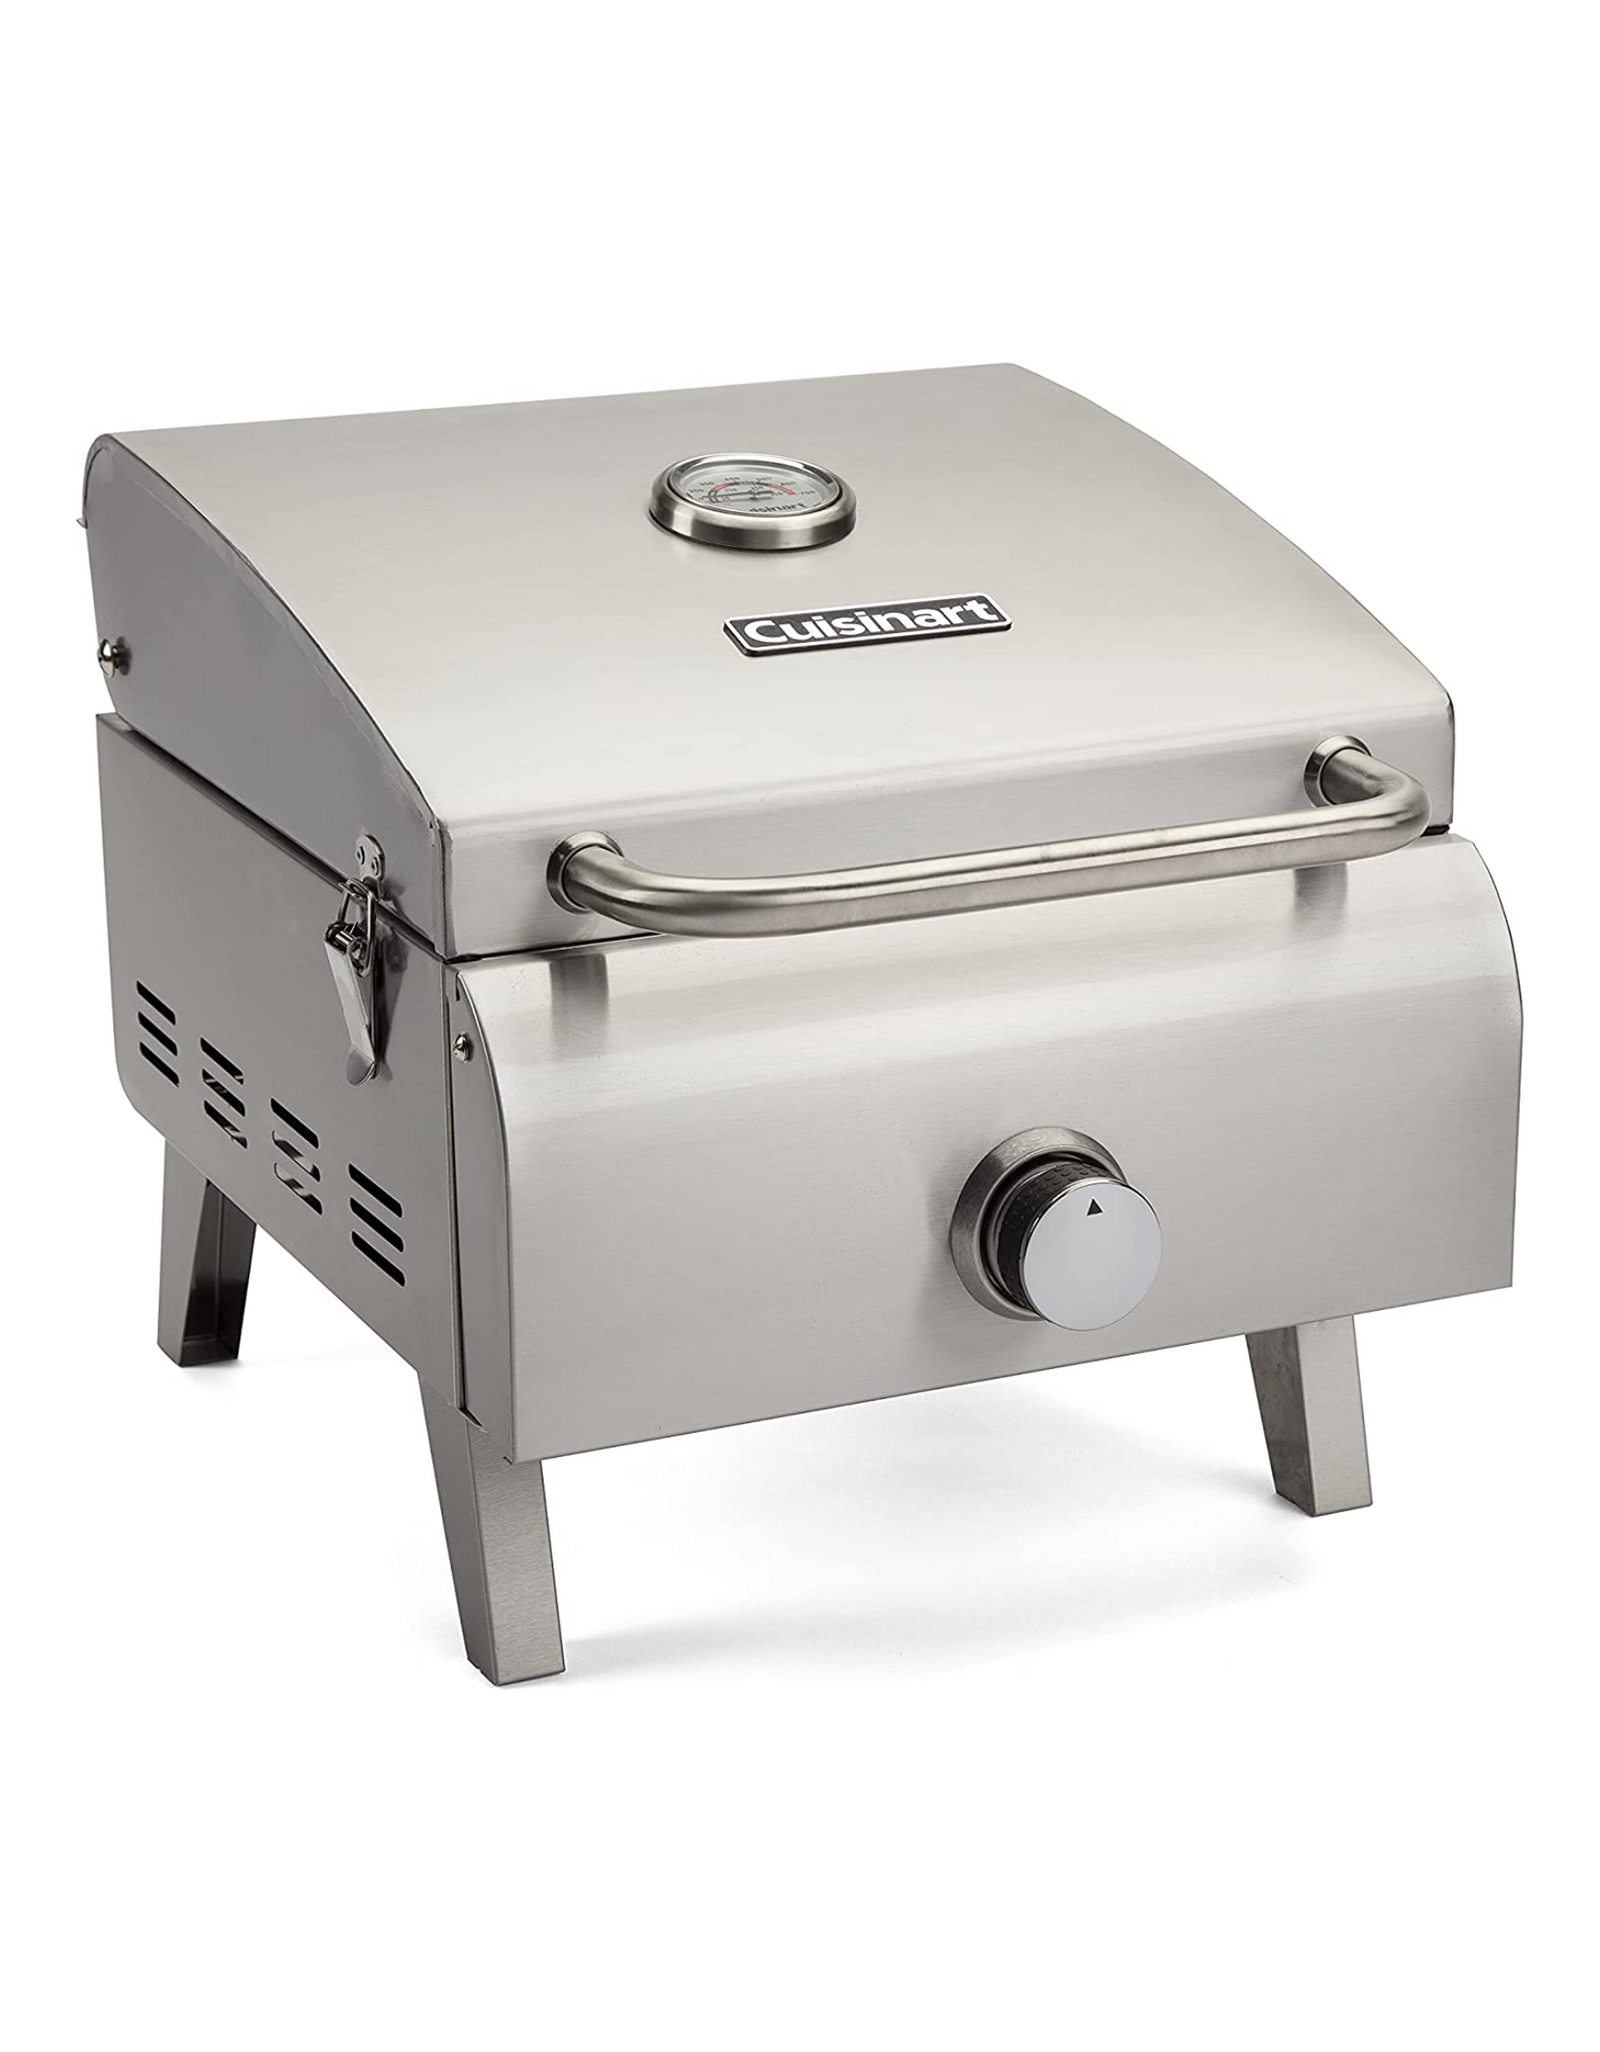 Cuisinart CGG-608 Portable Grill, One-Burner, Stainless Steel